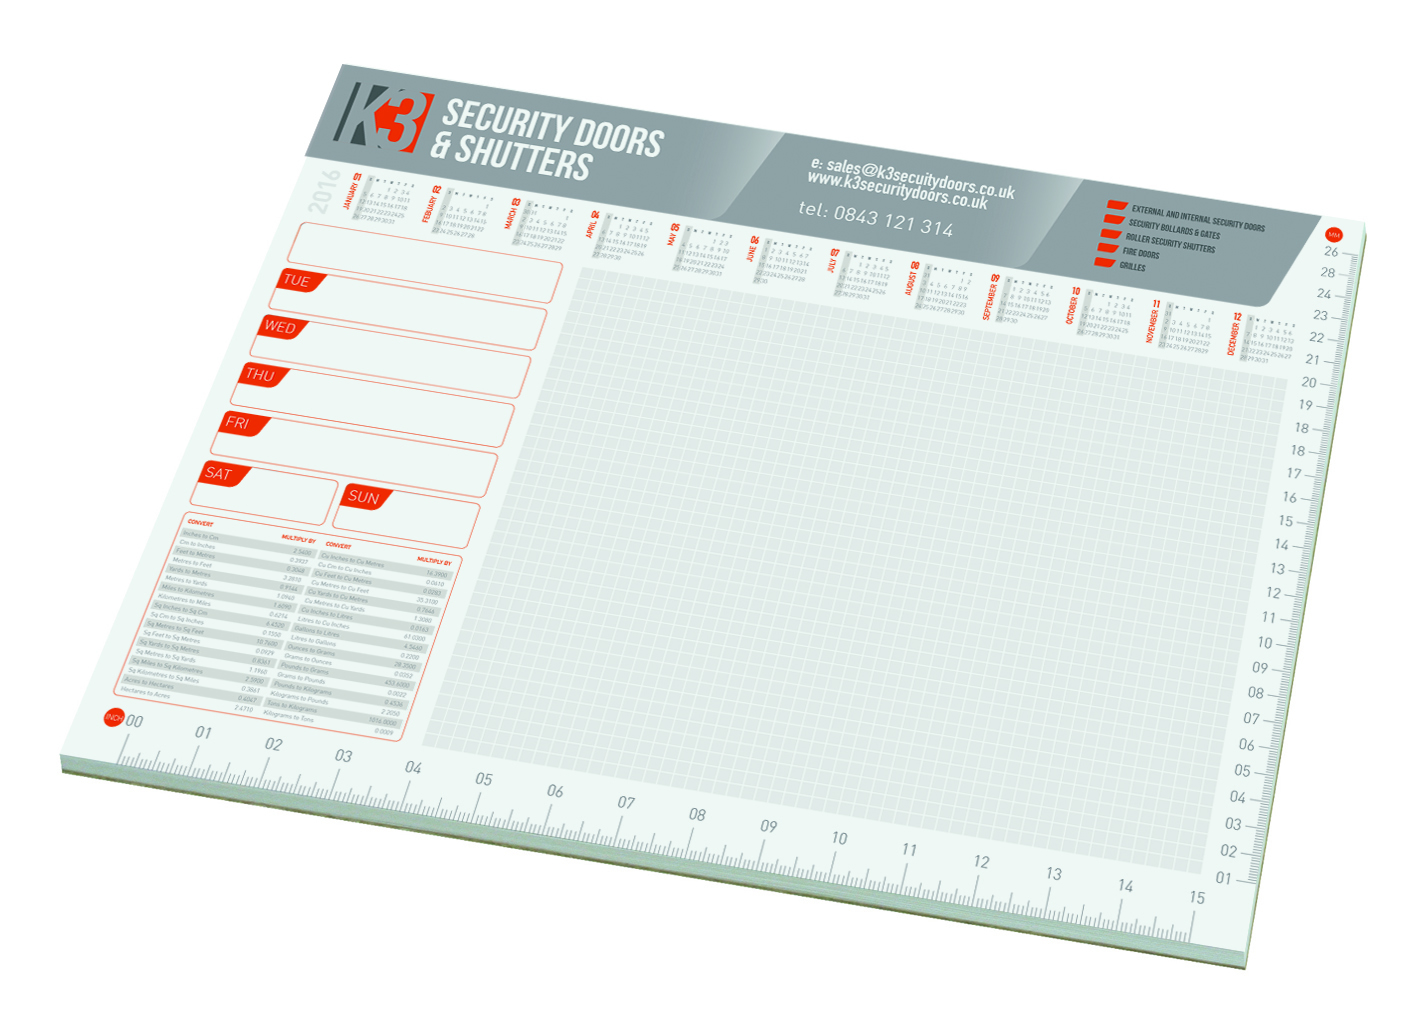 A3 Smart Pad with 50 sheets of 80gsm paper and full colour print